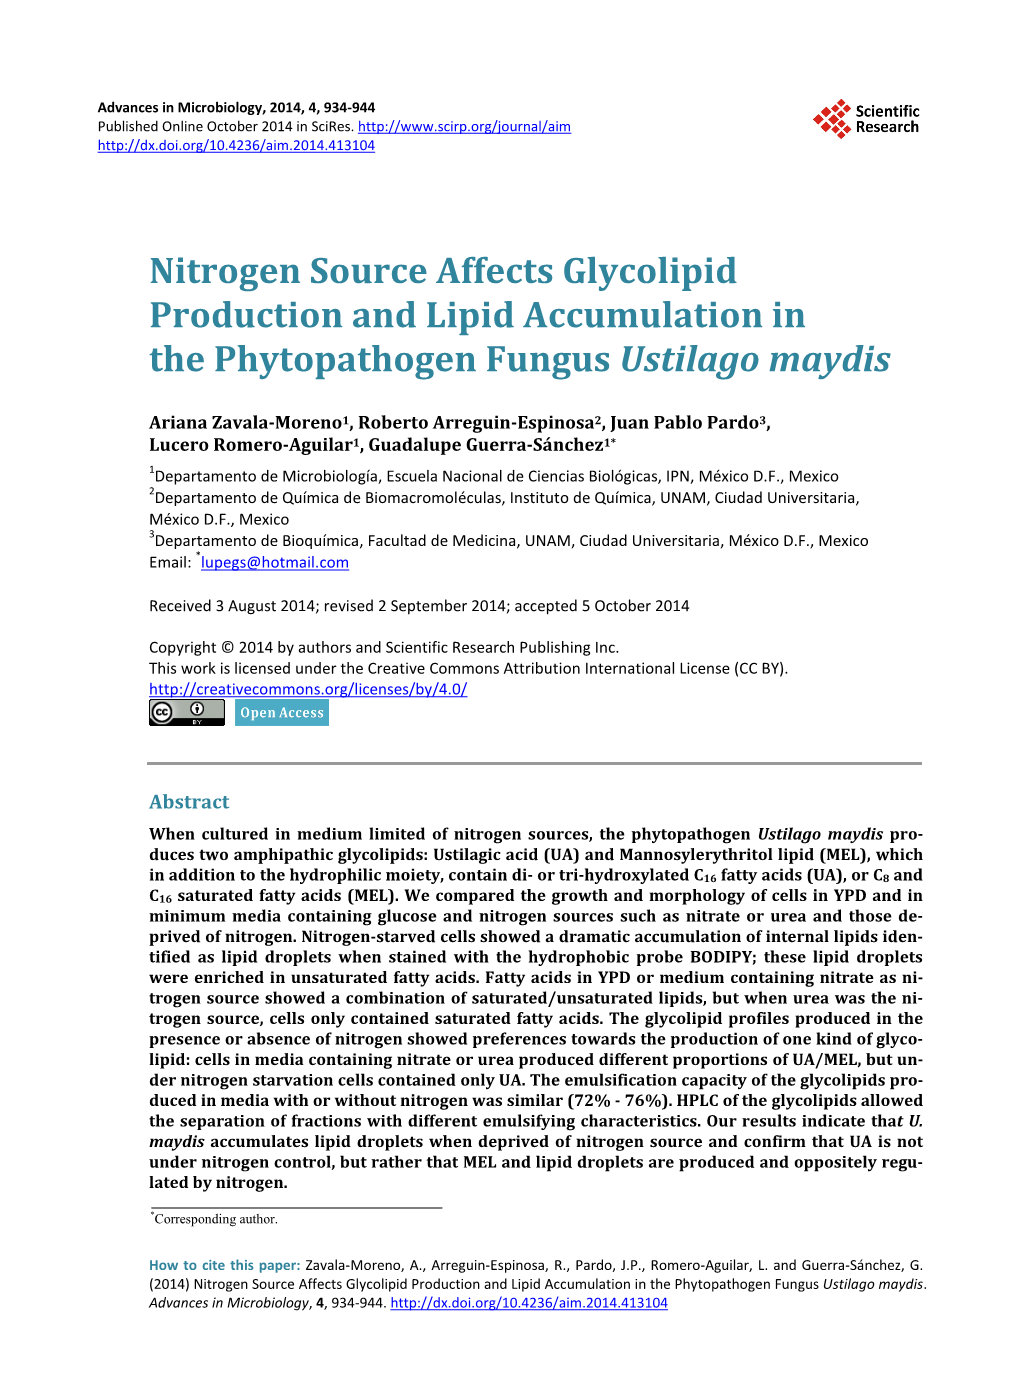 Nitrogen Source Affects Glycolipid Production and Lipid Accumulation in the Phytopathogen Fungus Ustilago Maydis